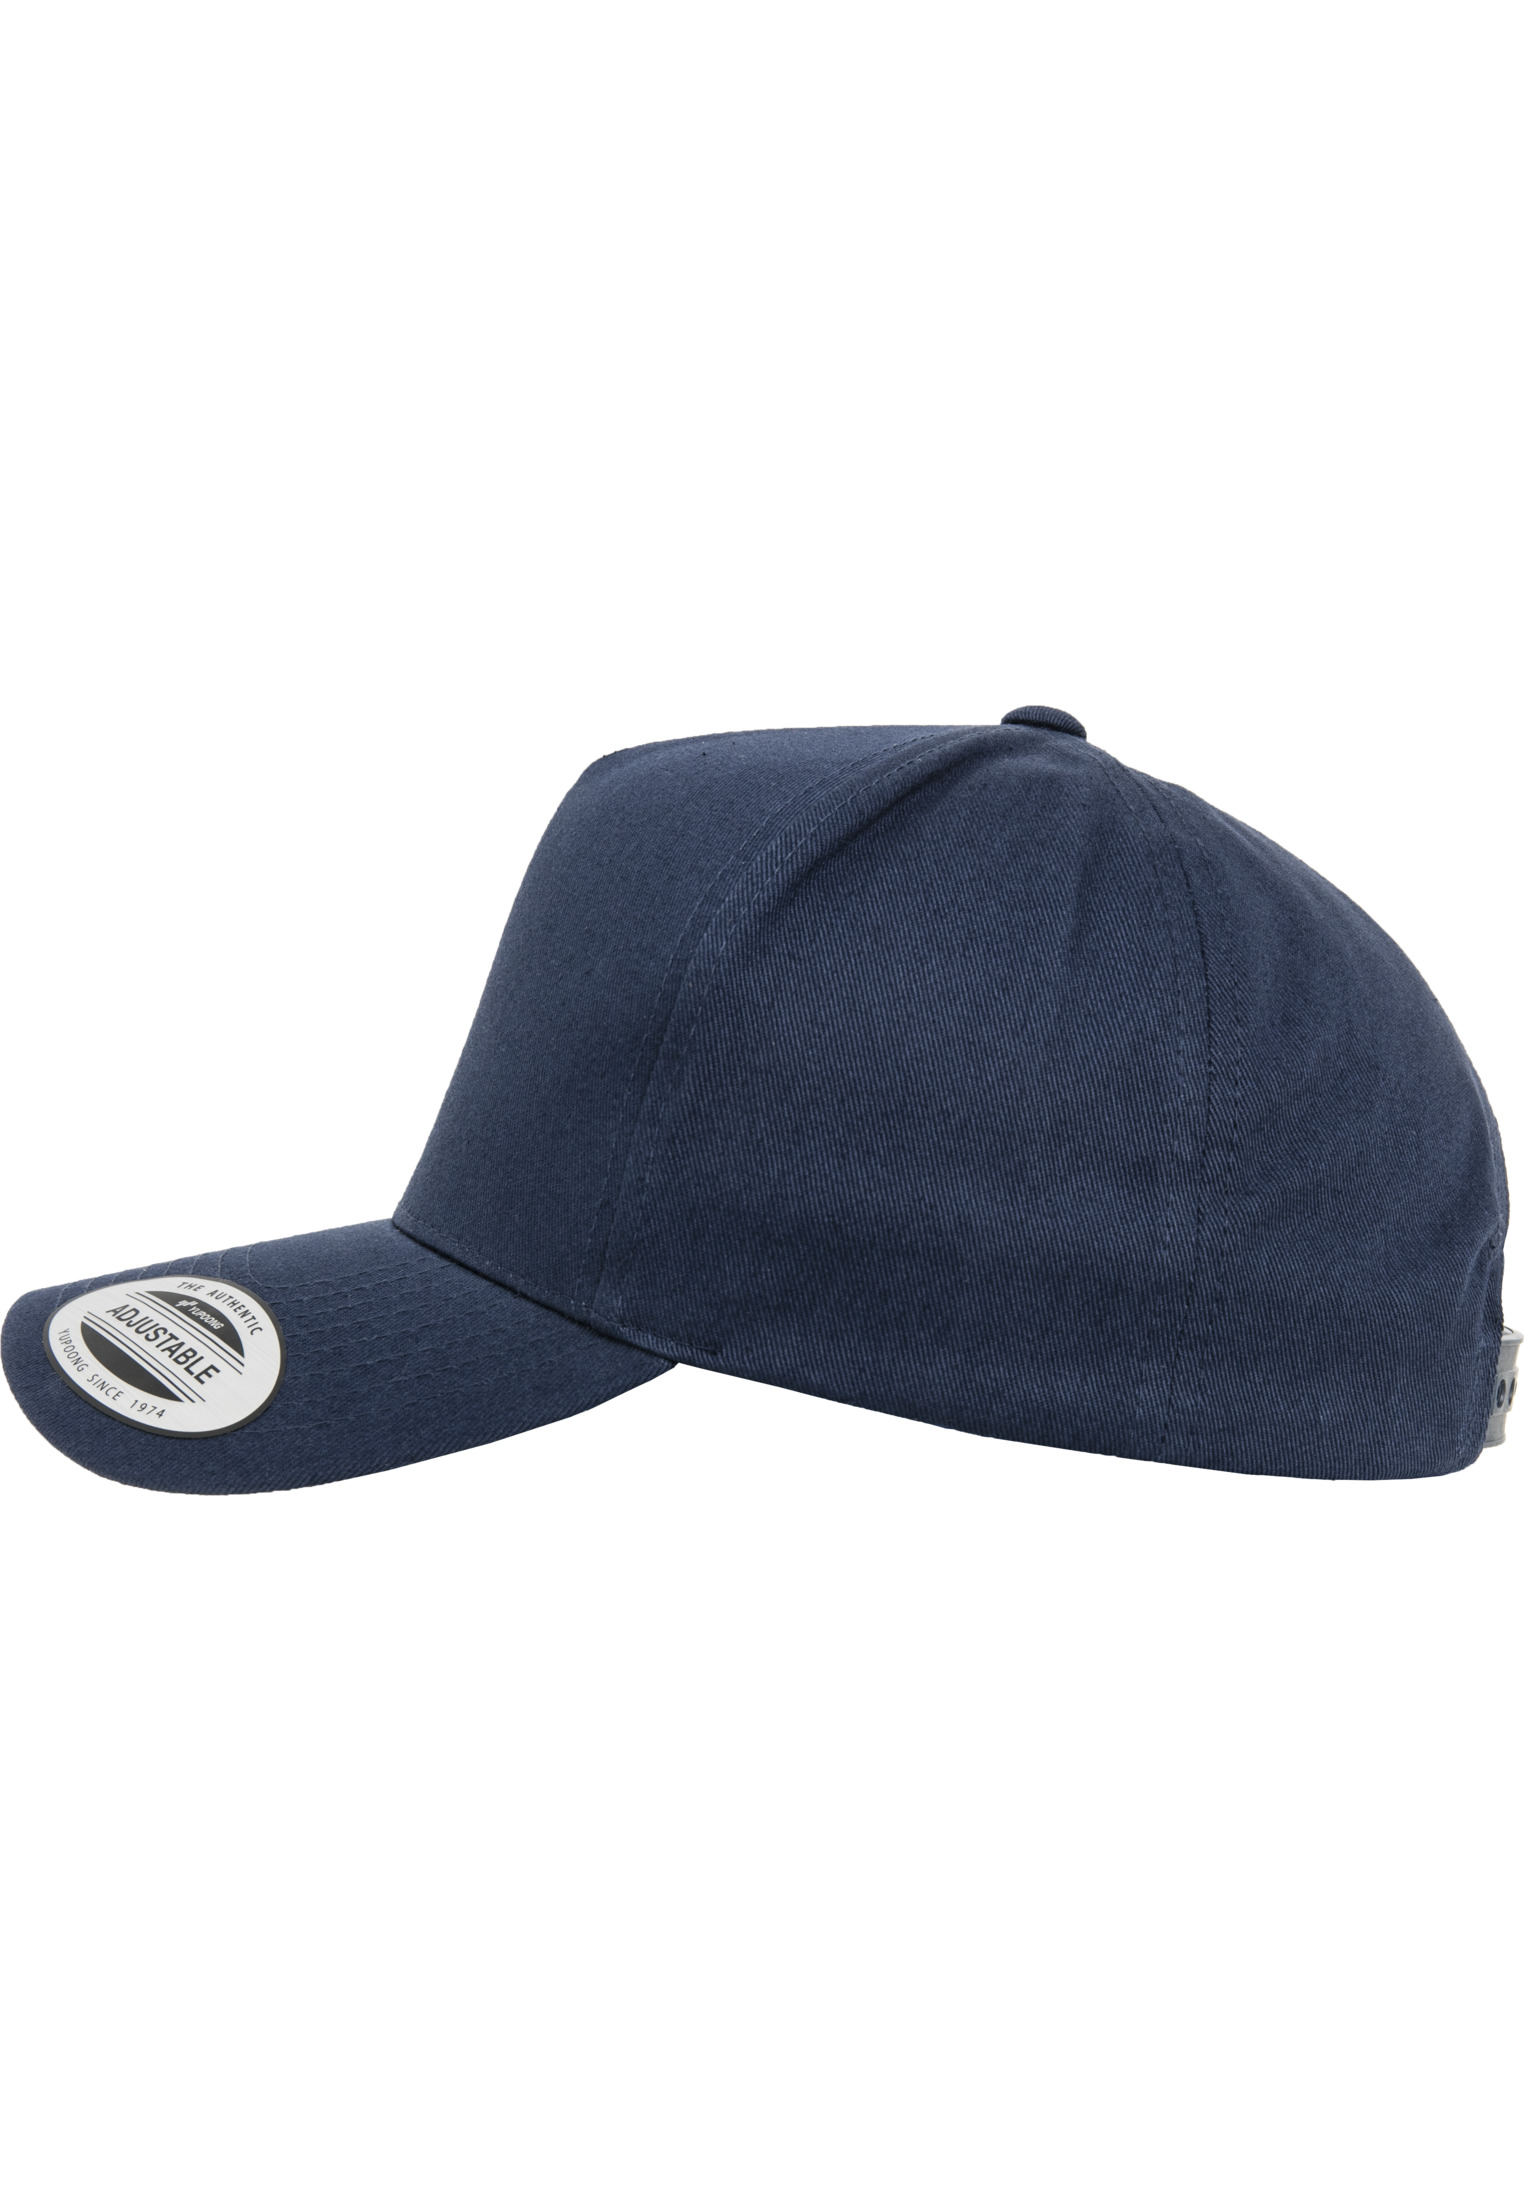 Snapback 5-Panel Curved Classic Snapback in Farbe navy